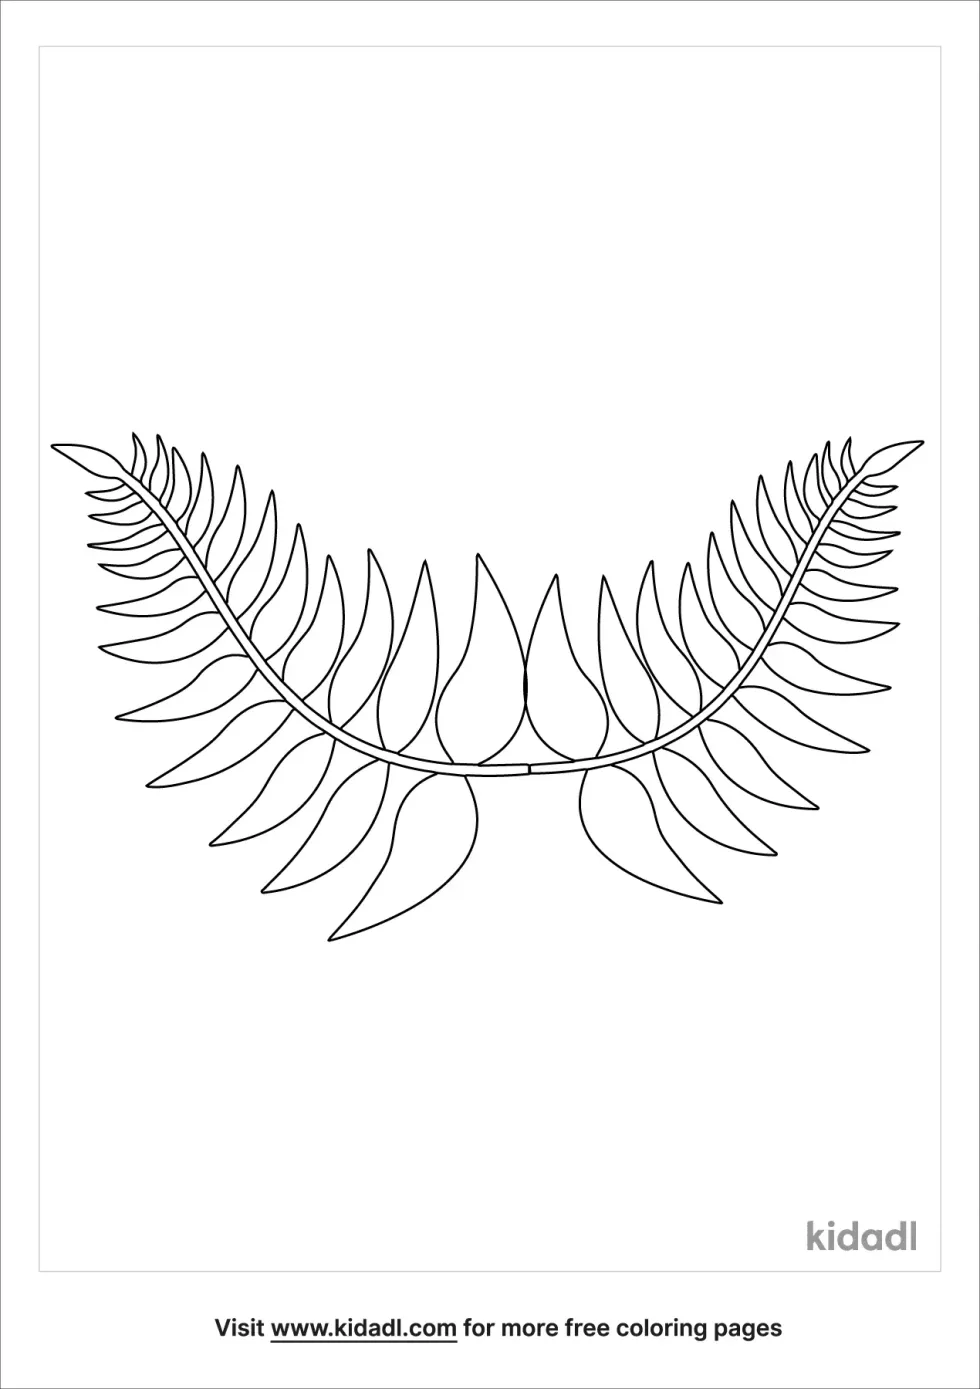 New Zealand Leaf Coloring Page